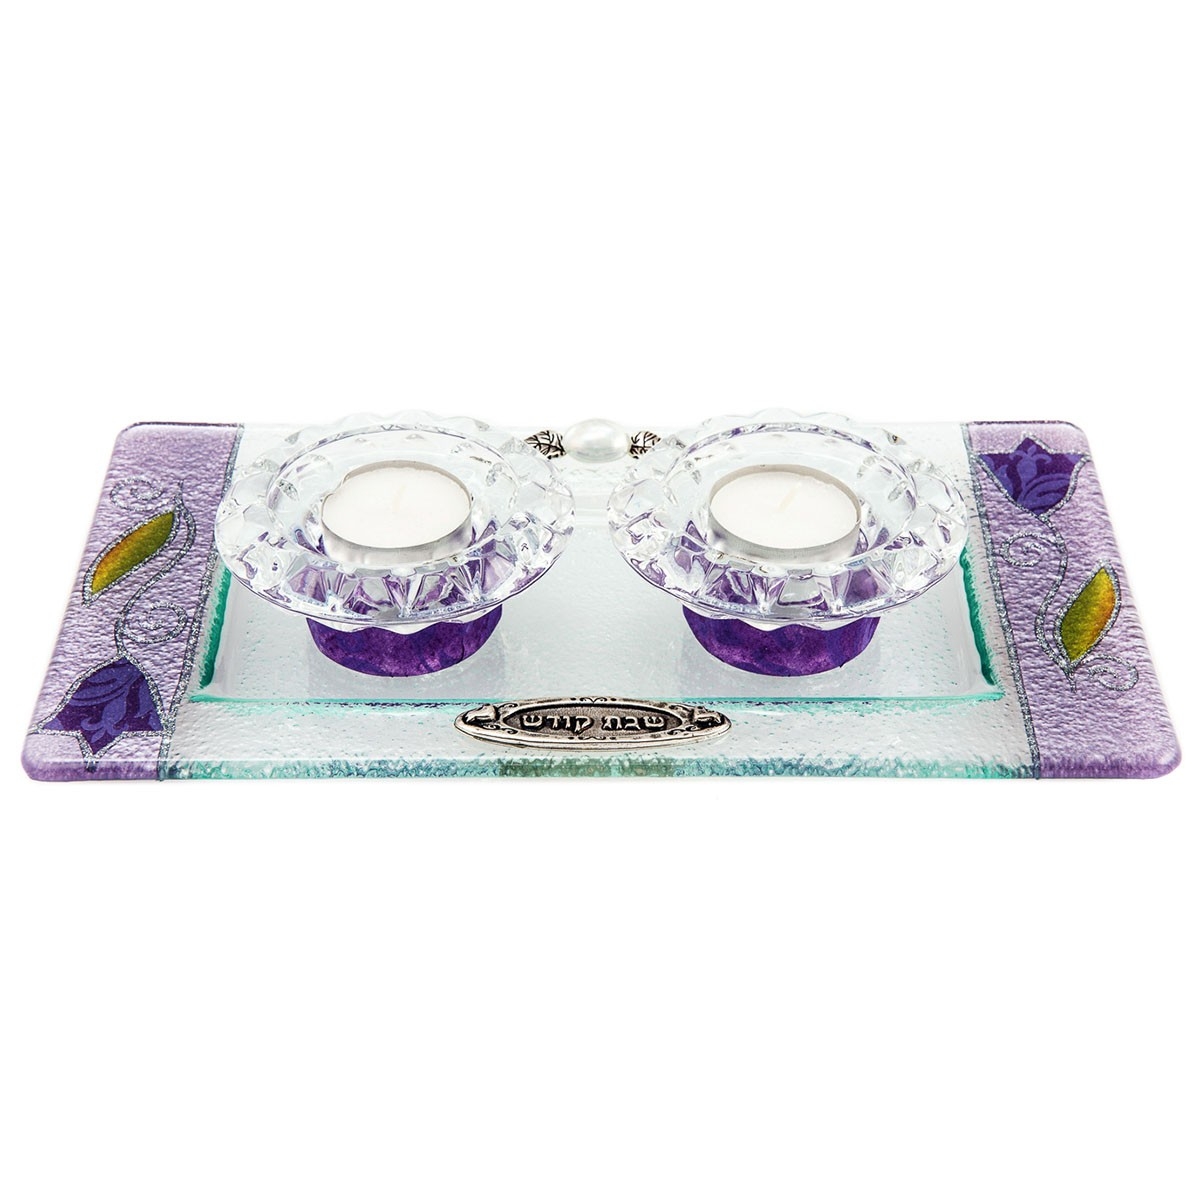 Lily Art Painted Glass Tealight Candleholders with Matching Tray (Purple Tulips) - 1